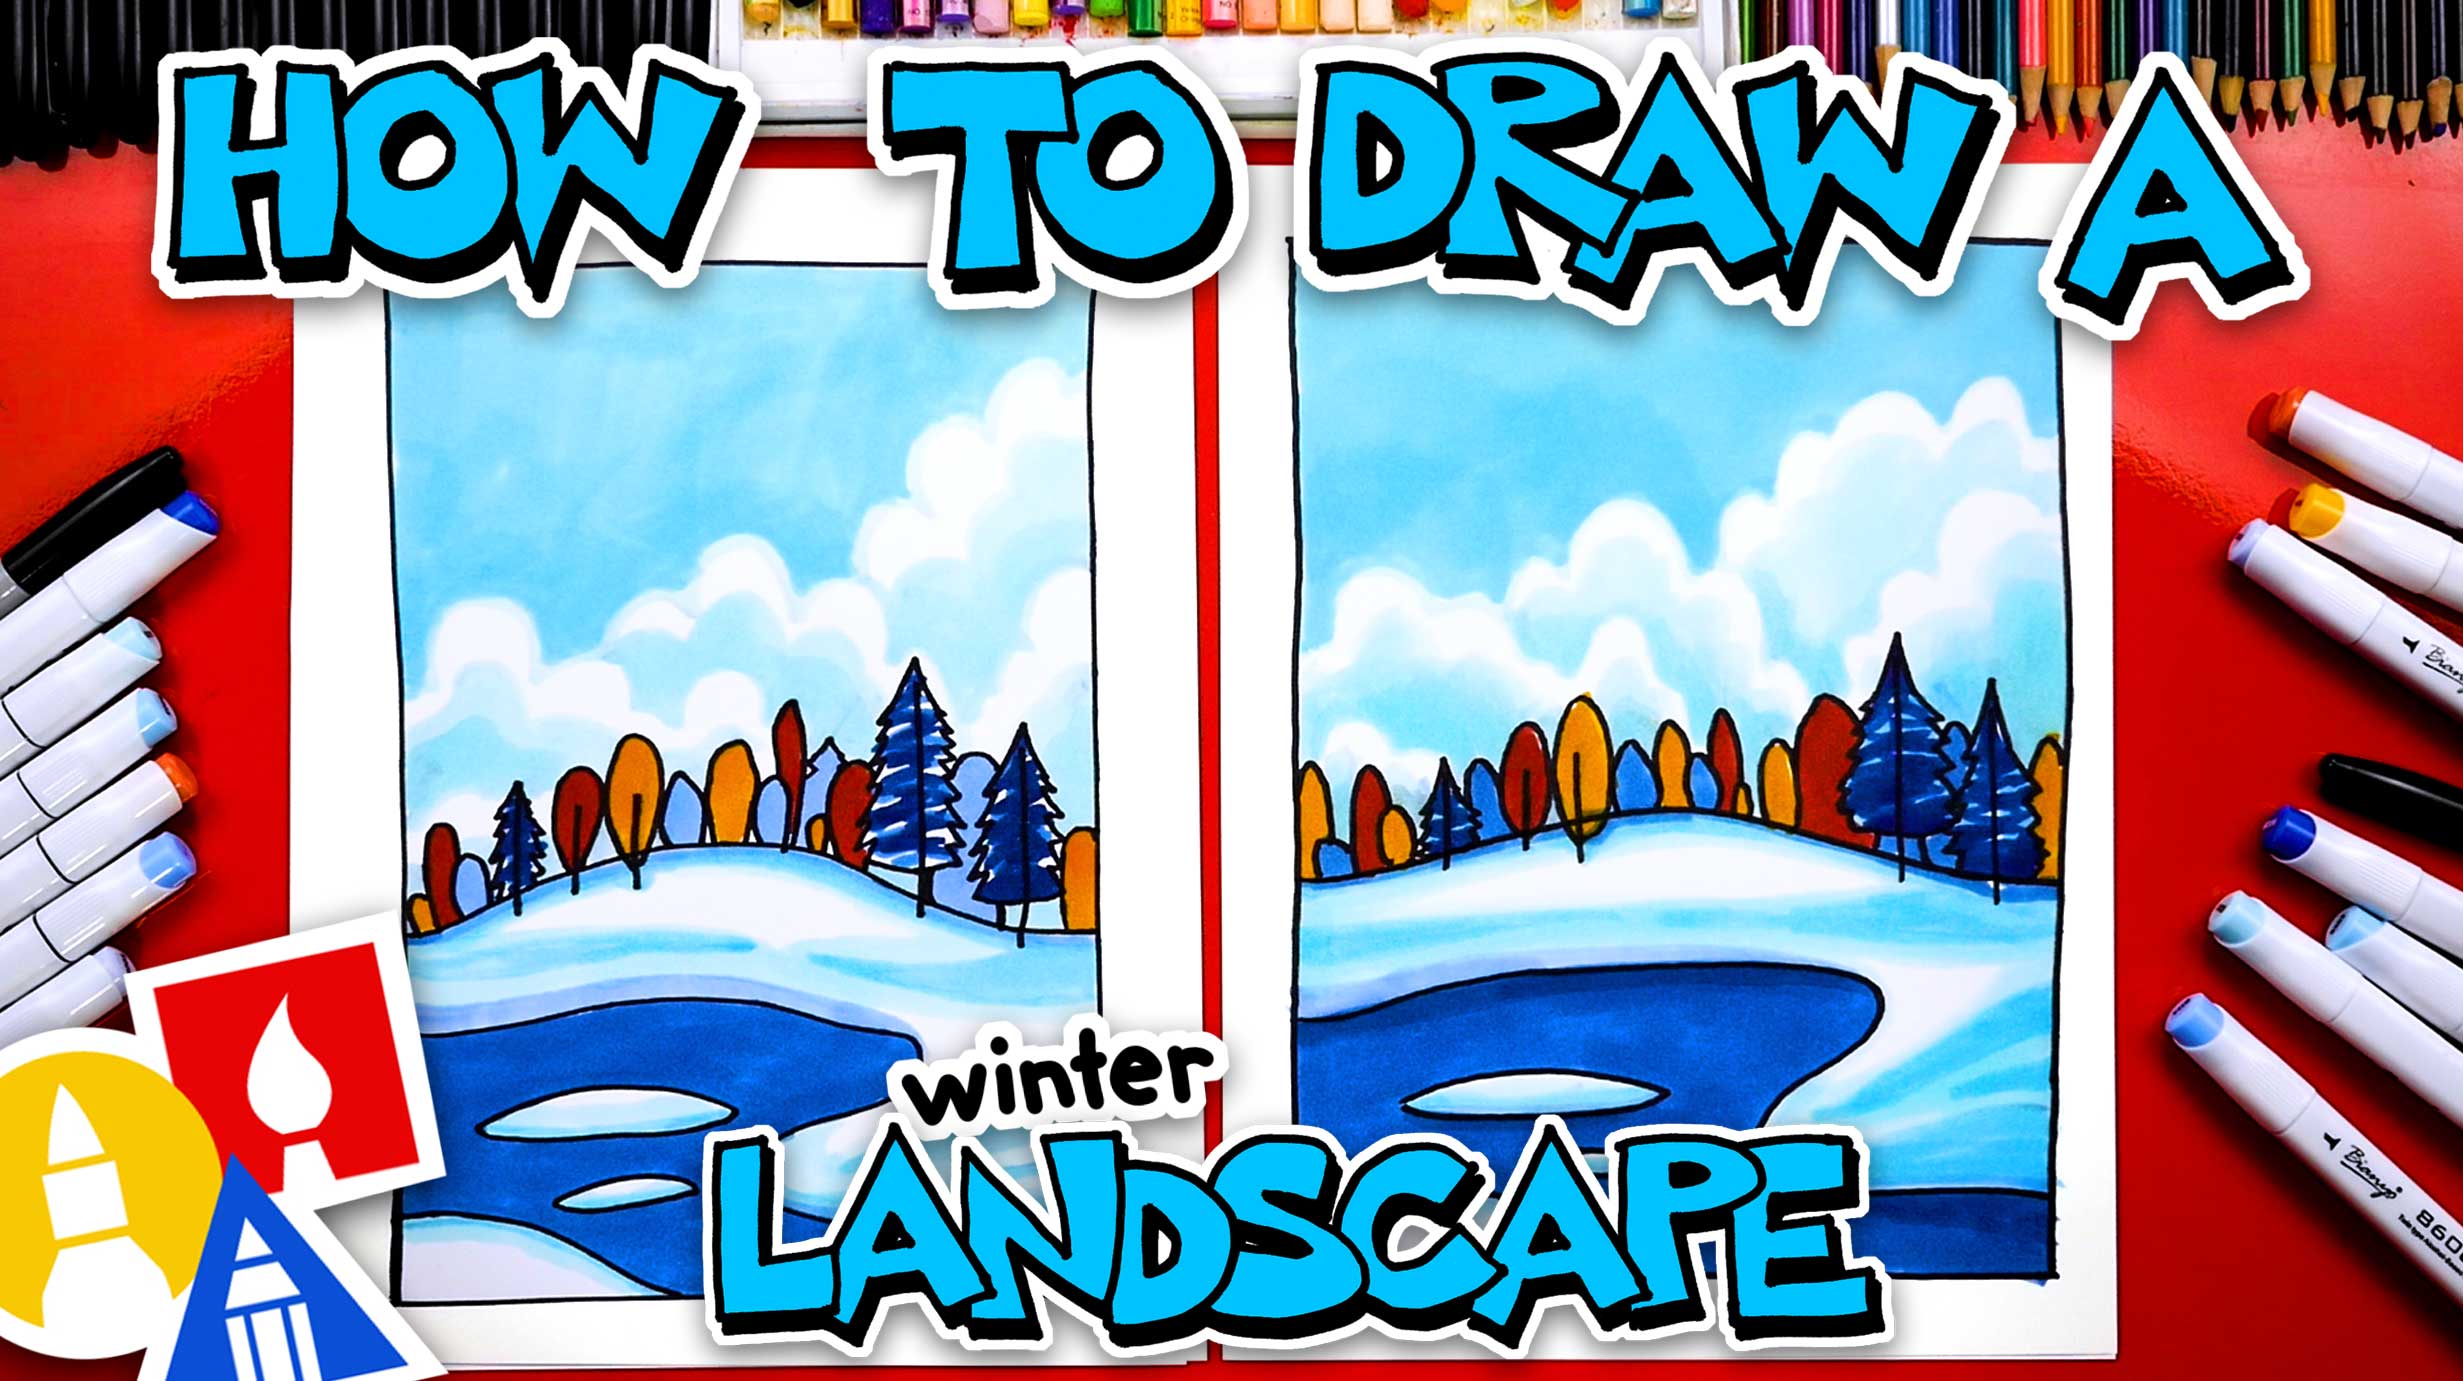 How To Draw A Winter Landscape version 2